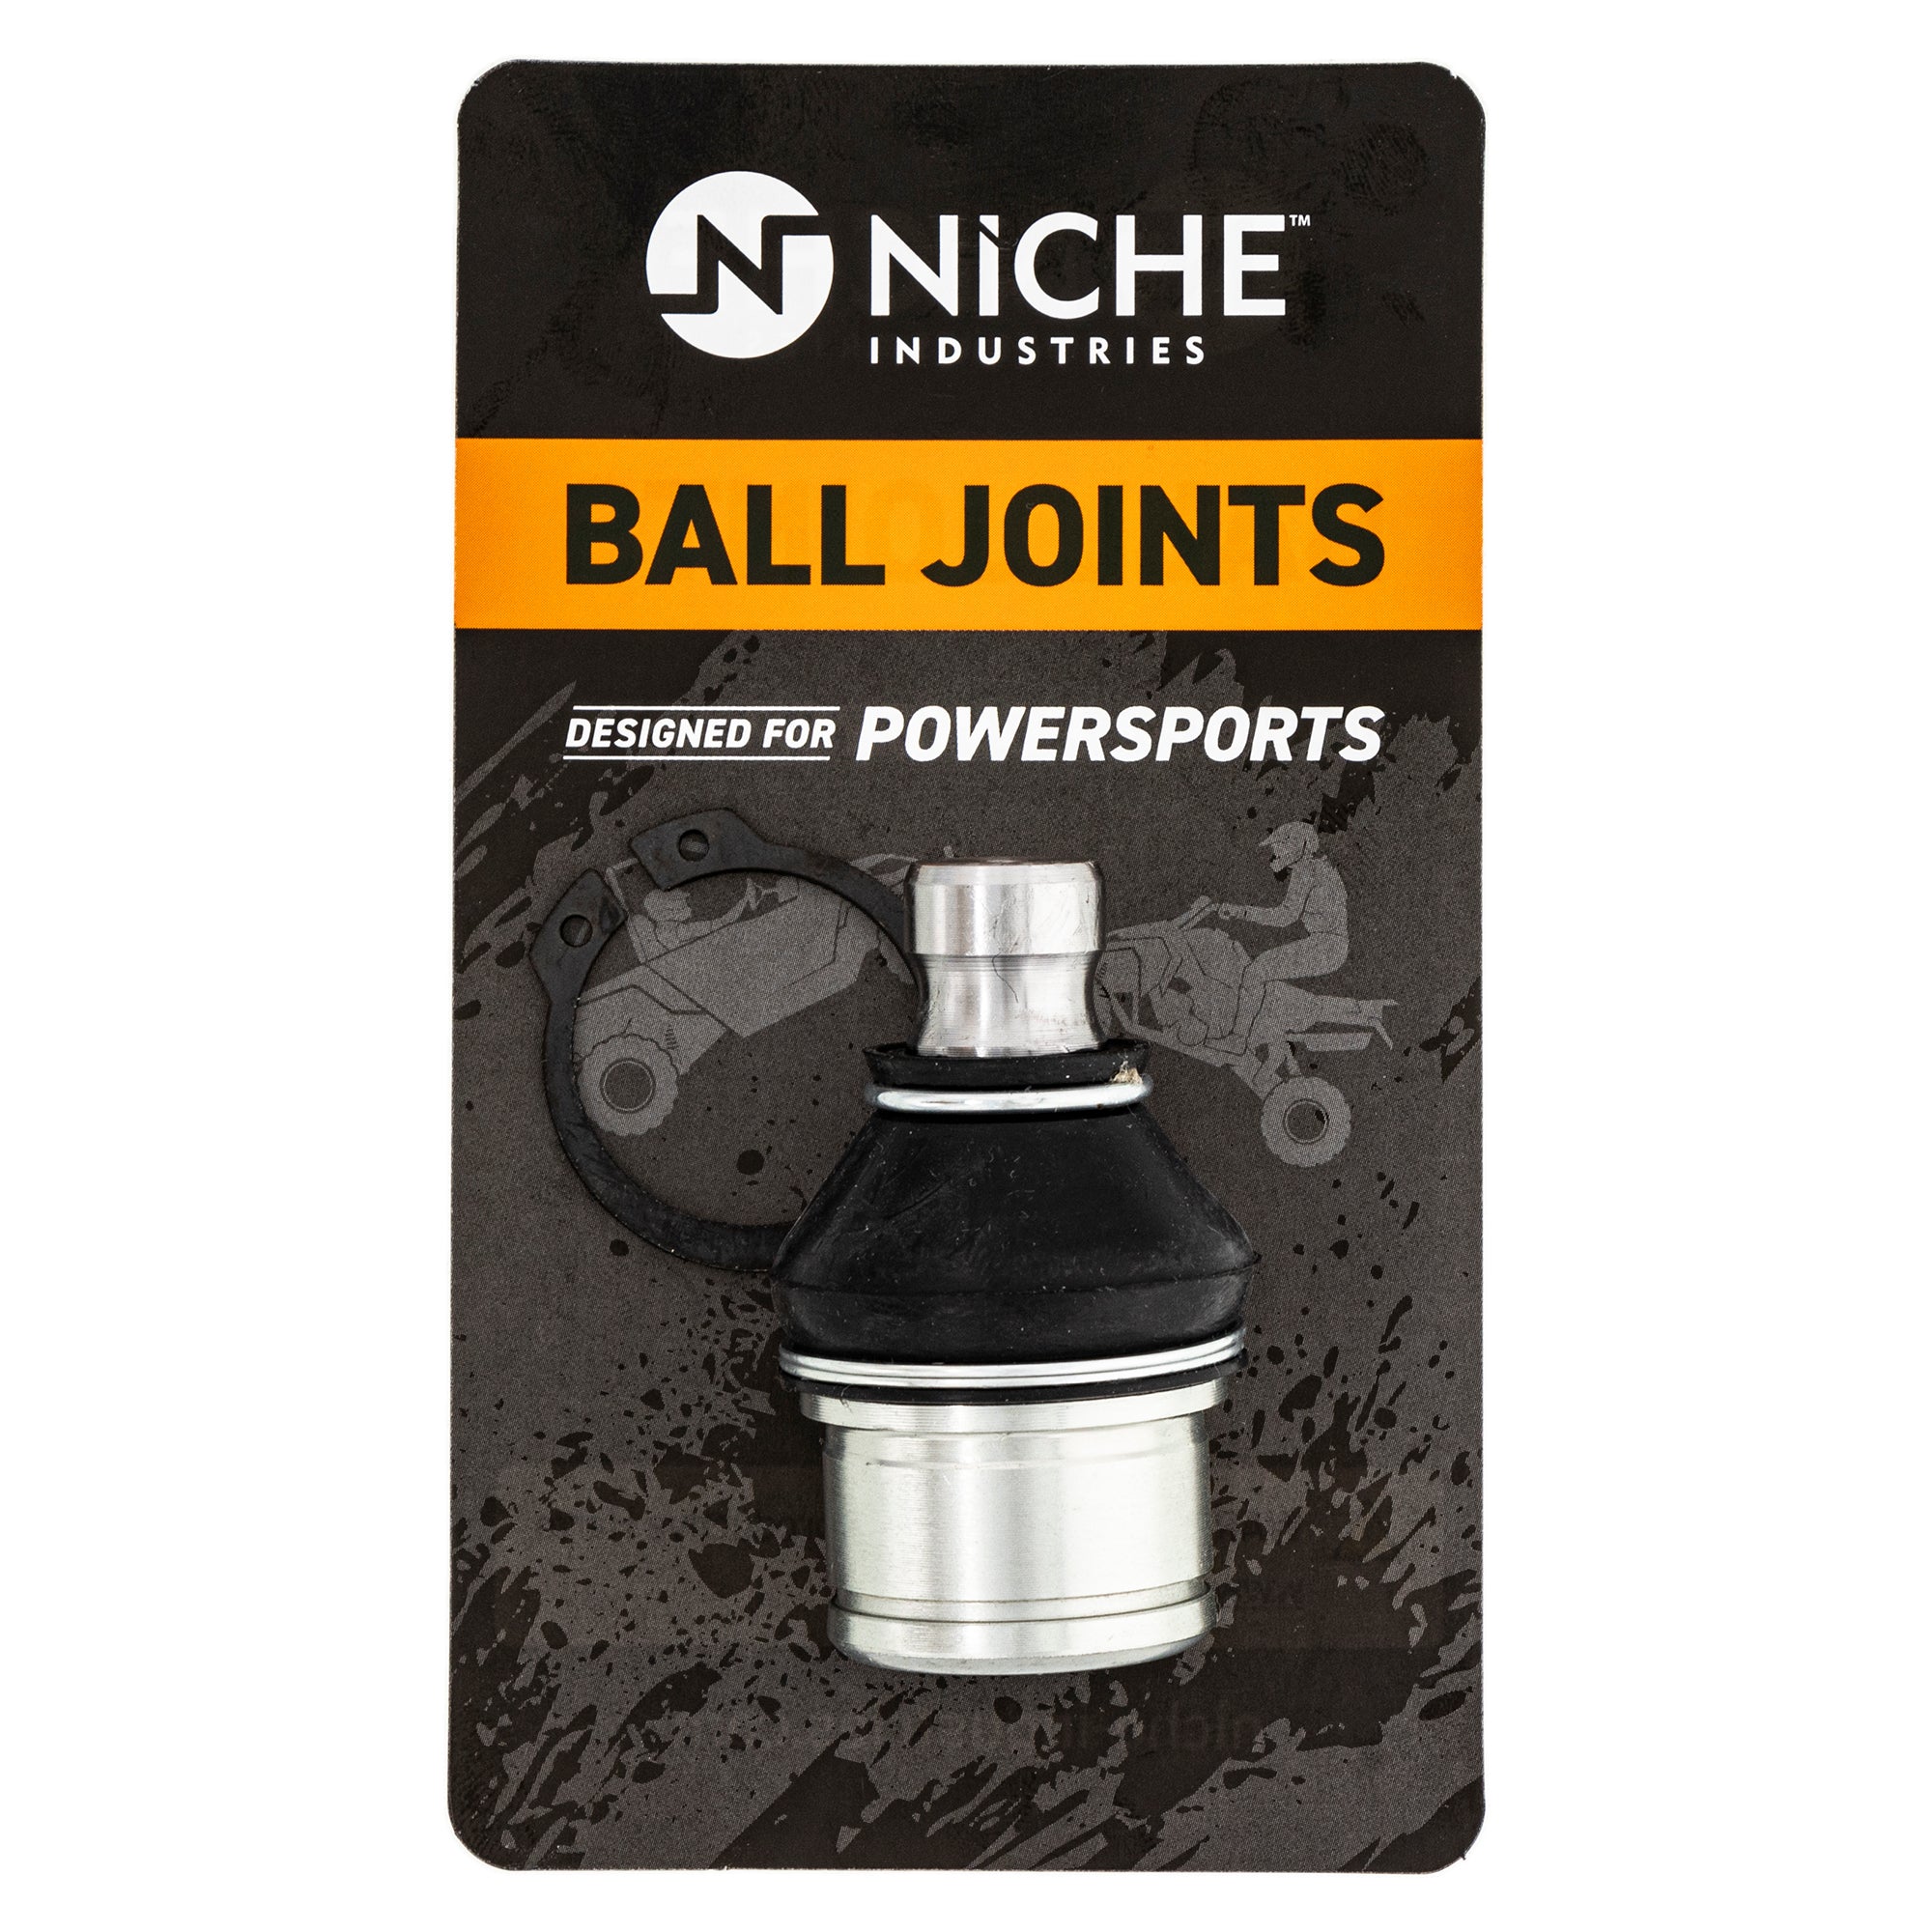 Ball Joint Upper/Lower for Western Power Sports EPI Performance Arctic Cat Textron Cat NICHE 519-CBJ2223T